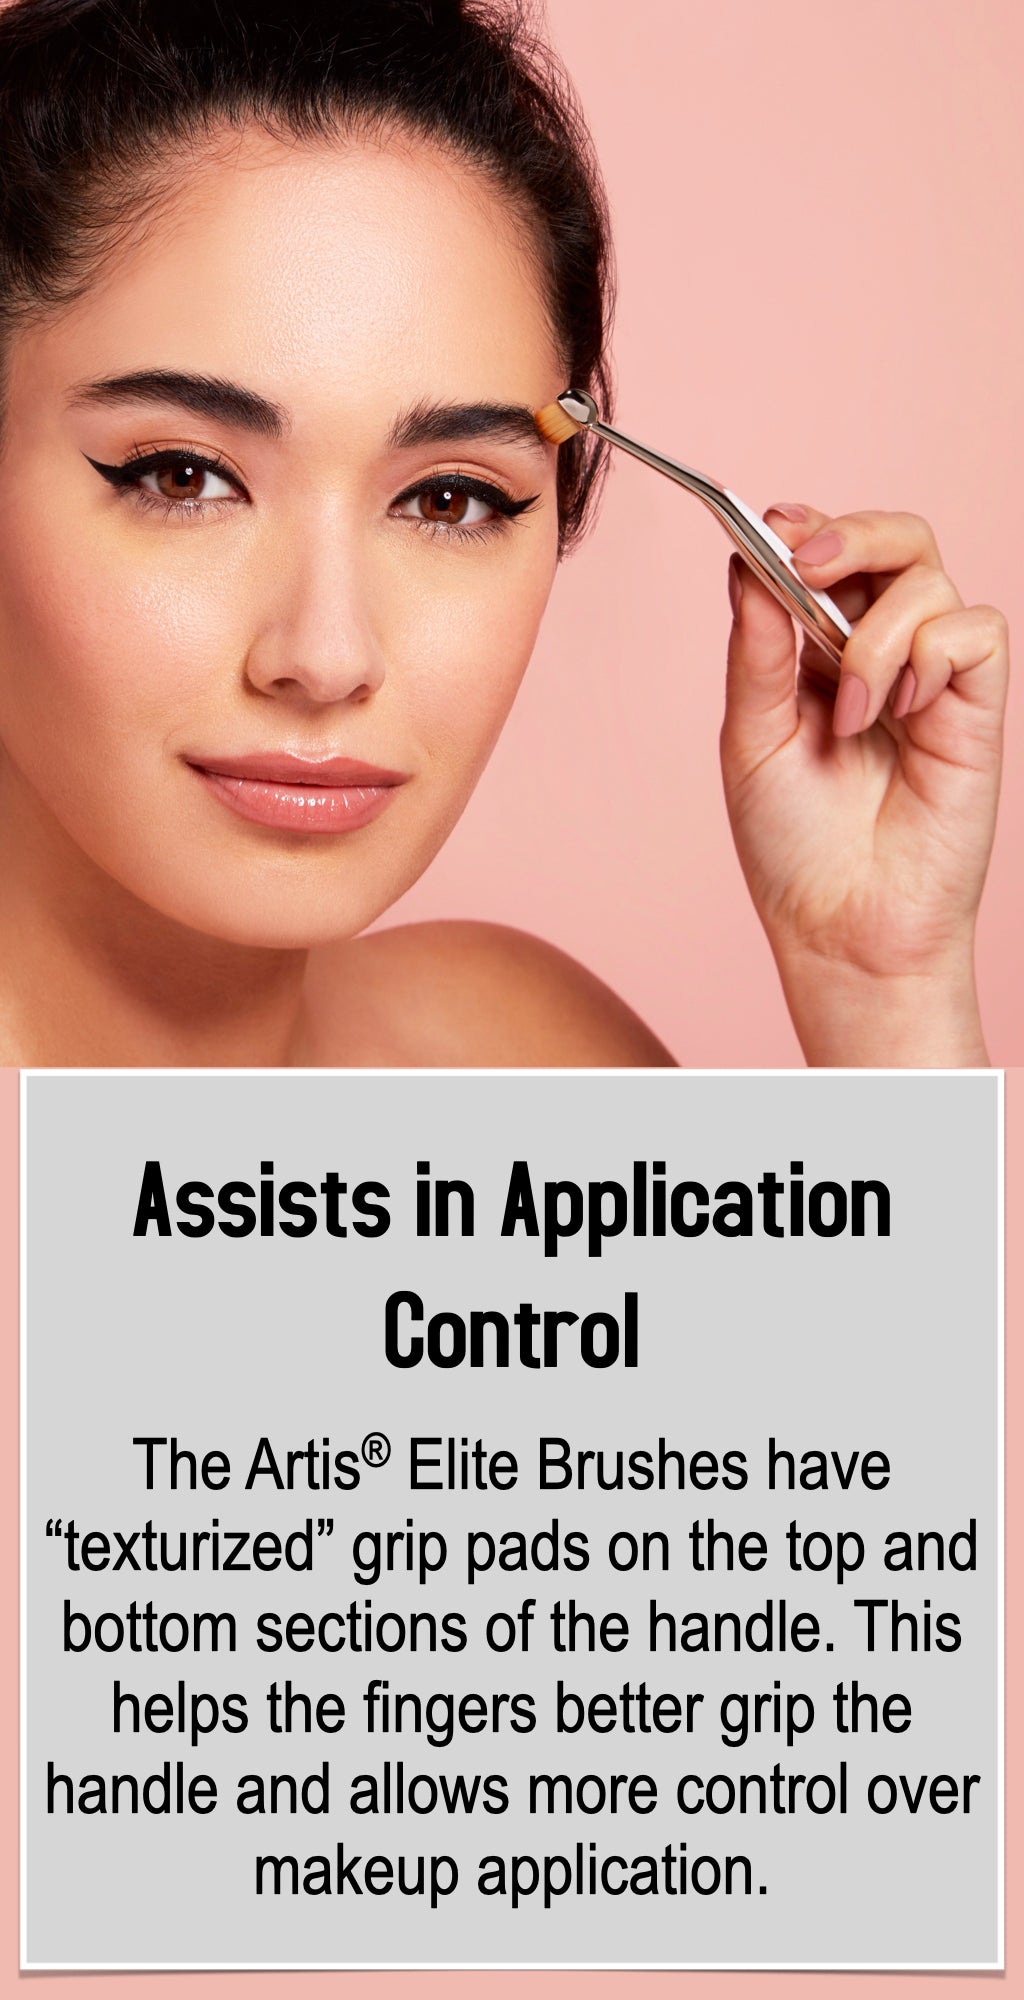 The Artis® Elite Brushes have “texturized” grip pads on the top and bottom sections of the handle. This helps the fingers better grip the handle and allows more control over makeup application.